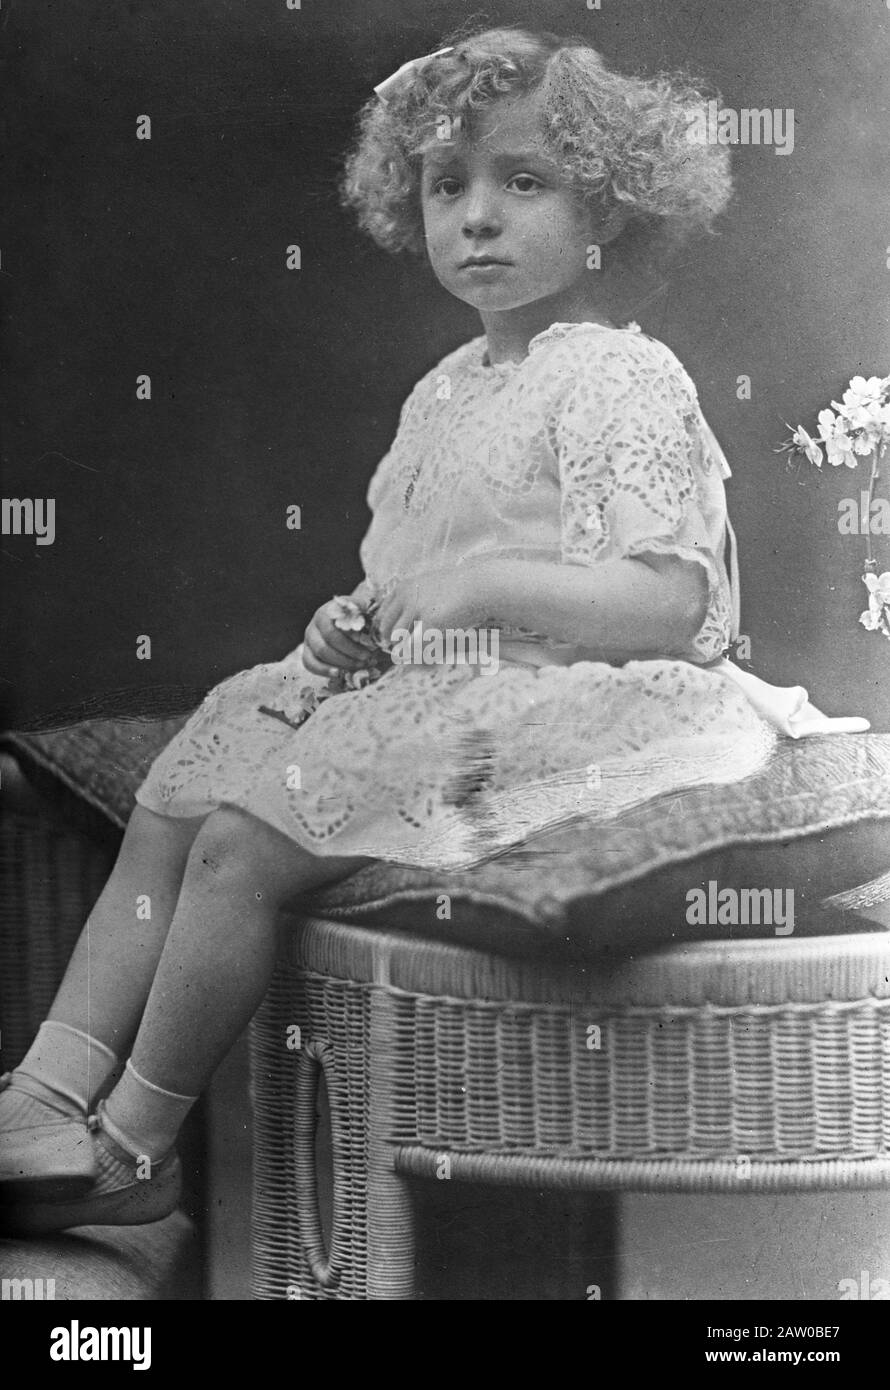 Infanta Beatriz of Spain (1909-2002), daughter of King Alfonso XIII of Spain and Victoria Eugenie of Battenberg ca. 1910-1915 Stock Photo